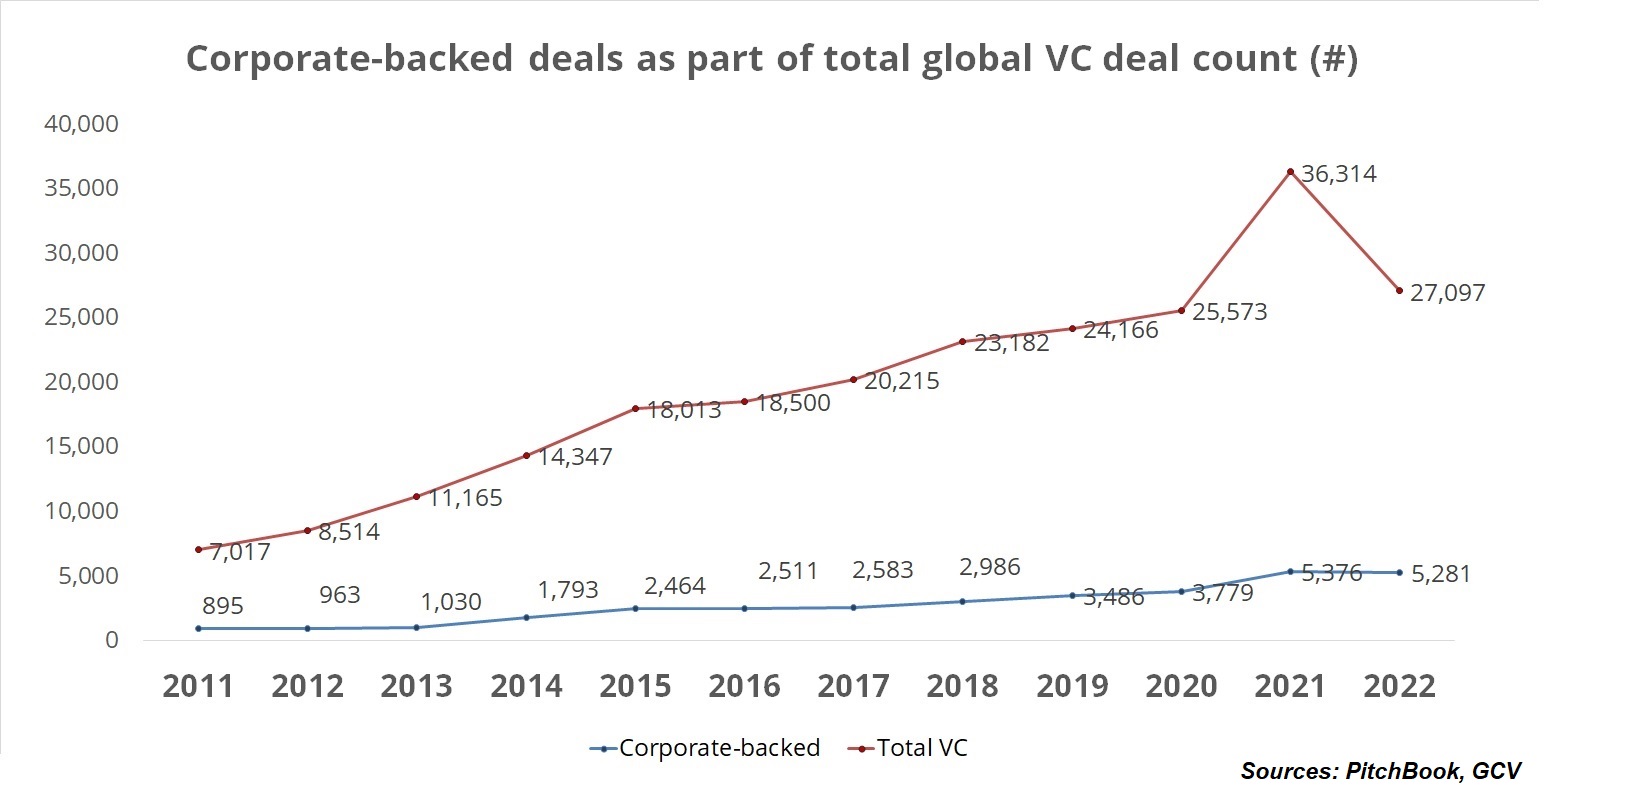 Line chart showing the evolution of total VC market deals, according to PitchBook, versus corporate-backed deals, according to GCV's data, between 2011 and 2022